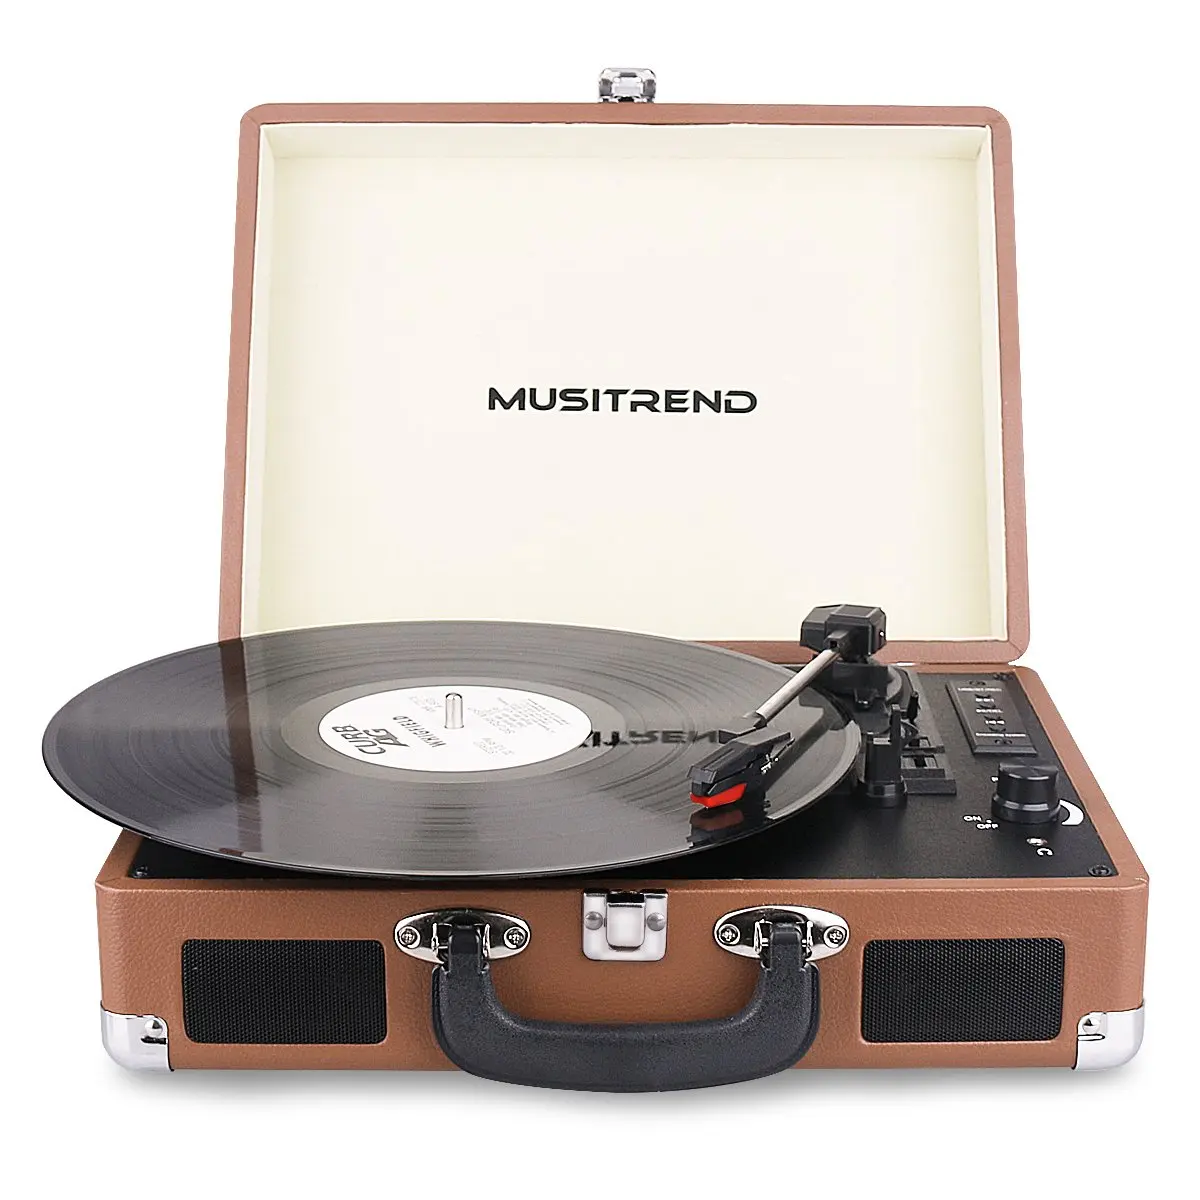 USB//SD Recorder Black Musitrend Bluetooth Vinyl Records Player Portable Suitcase Turntable Built-in Speakers Headphone Jack RCA line Out